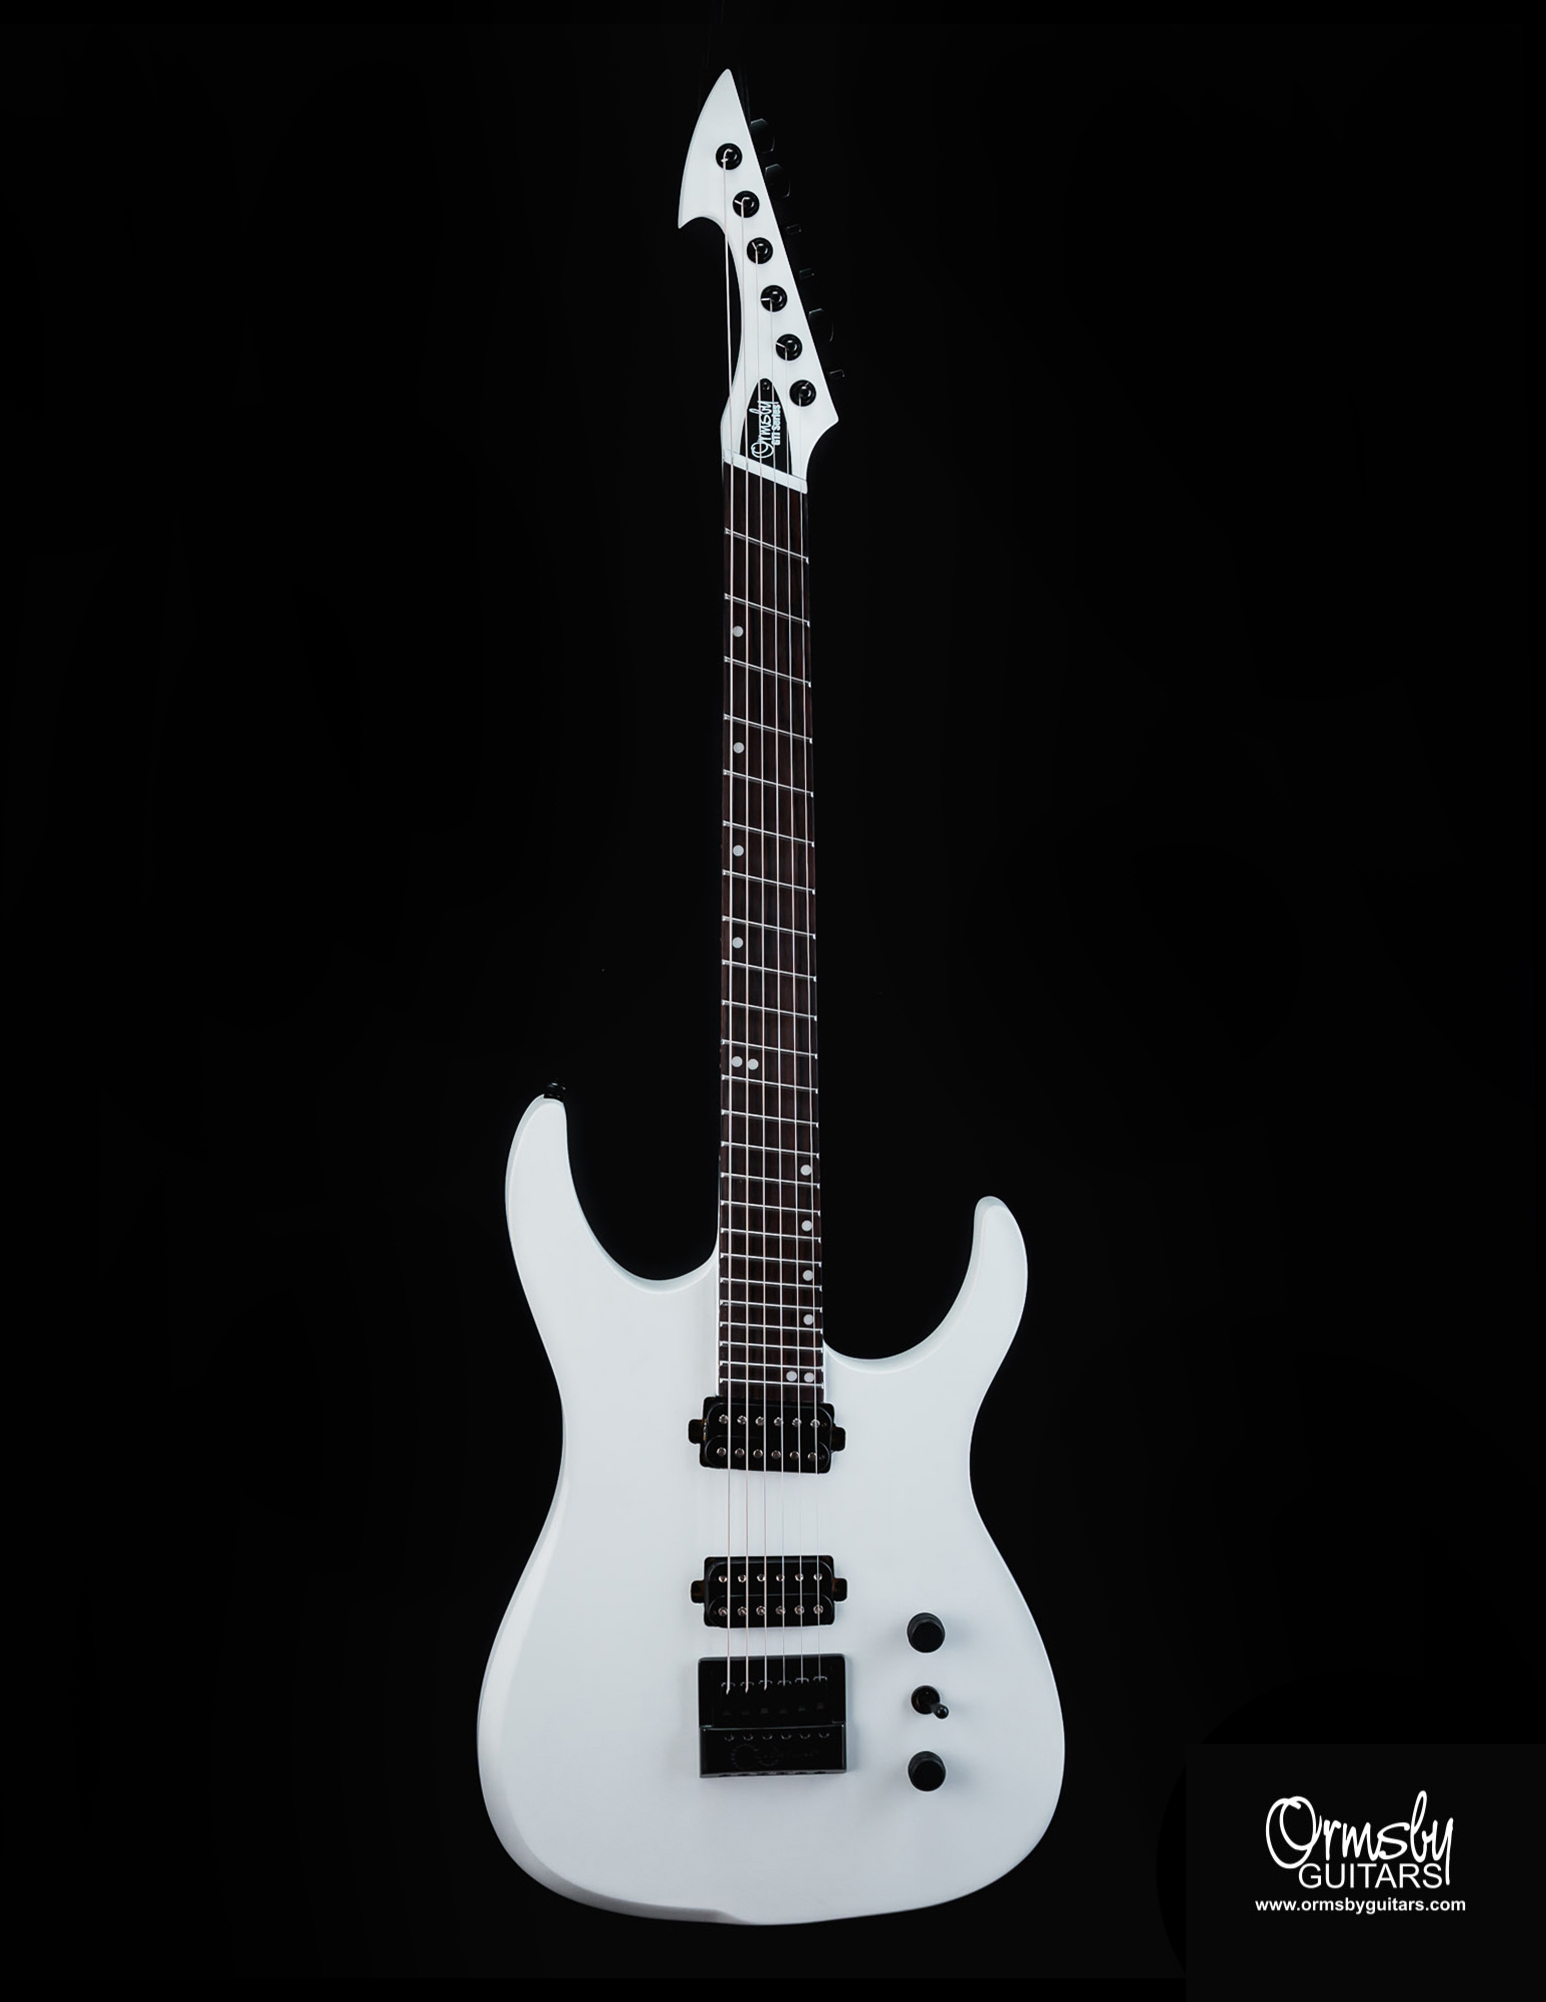 Ormsby Guitars GTI Hype